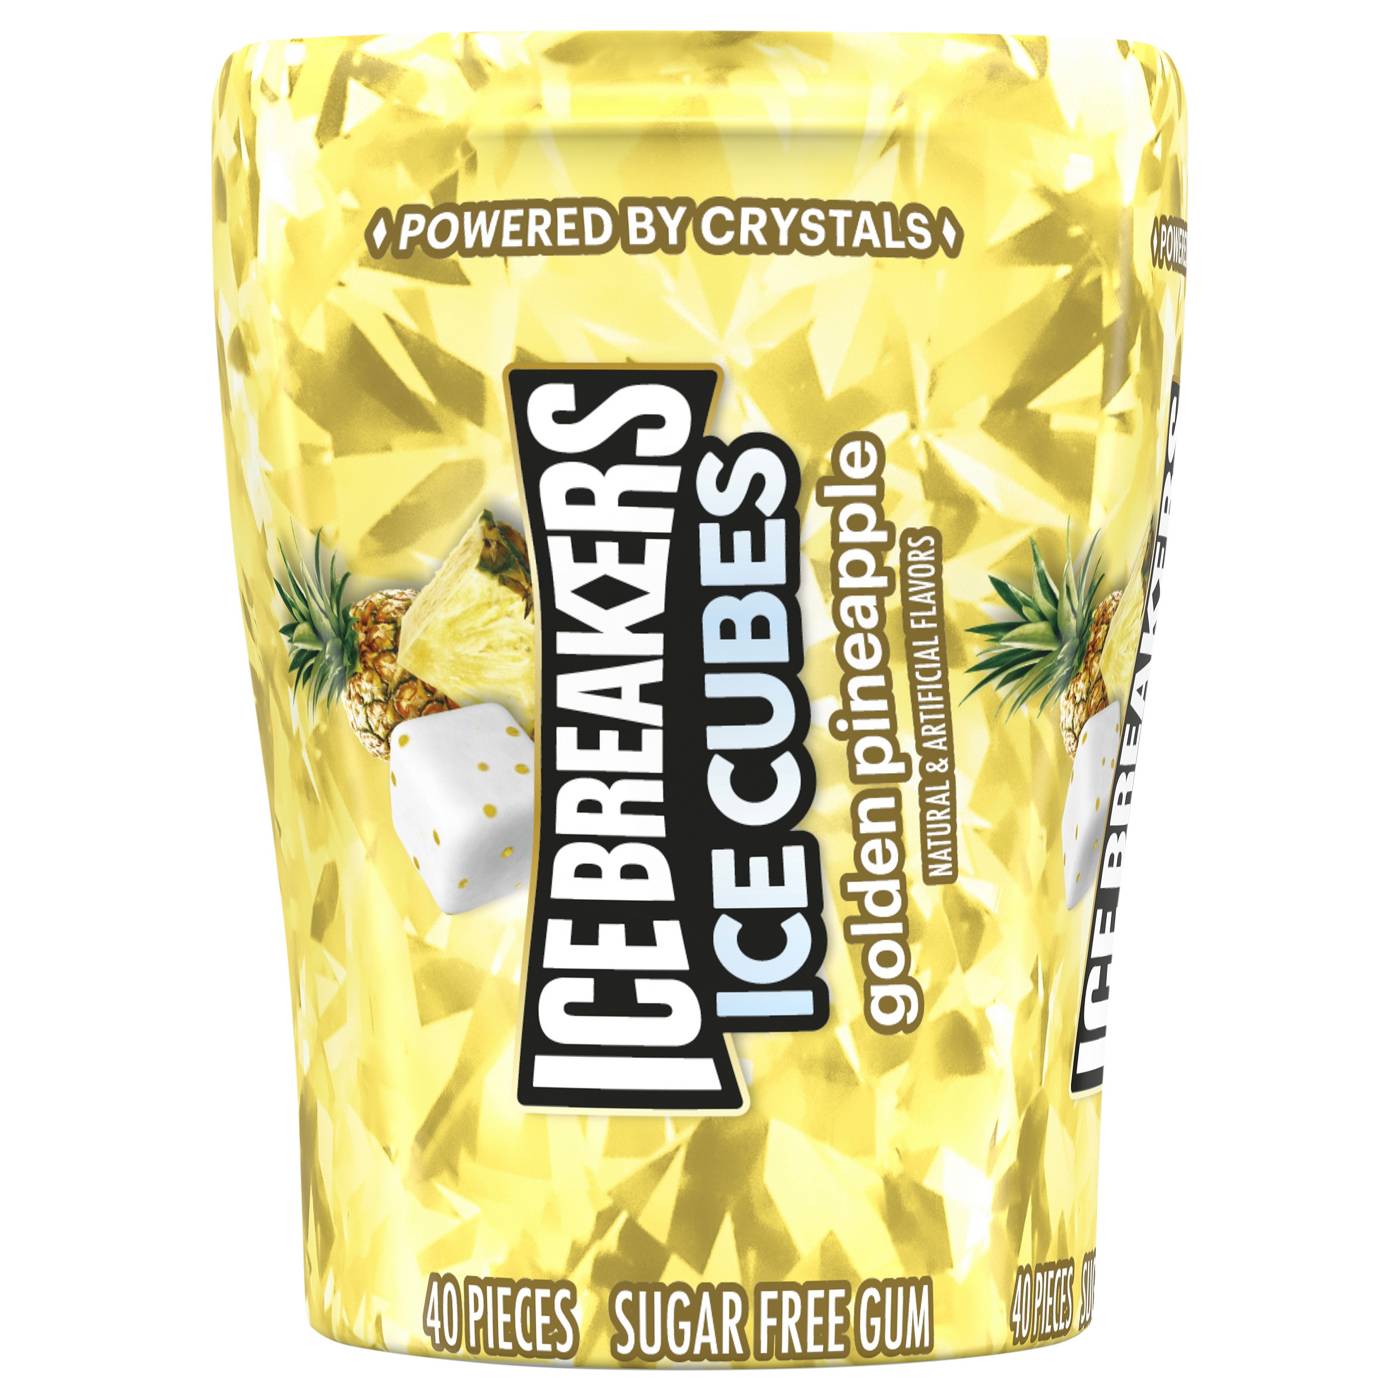 Ice Breakers Ice Cubes Golden Pineapple Sugar Free Chewing Gum Bottle; image 1 of 6